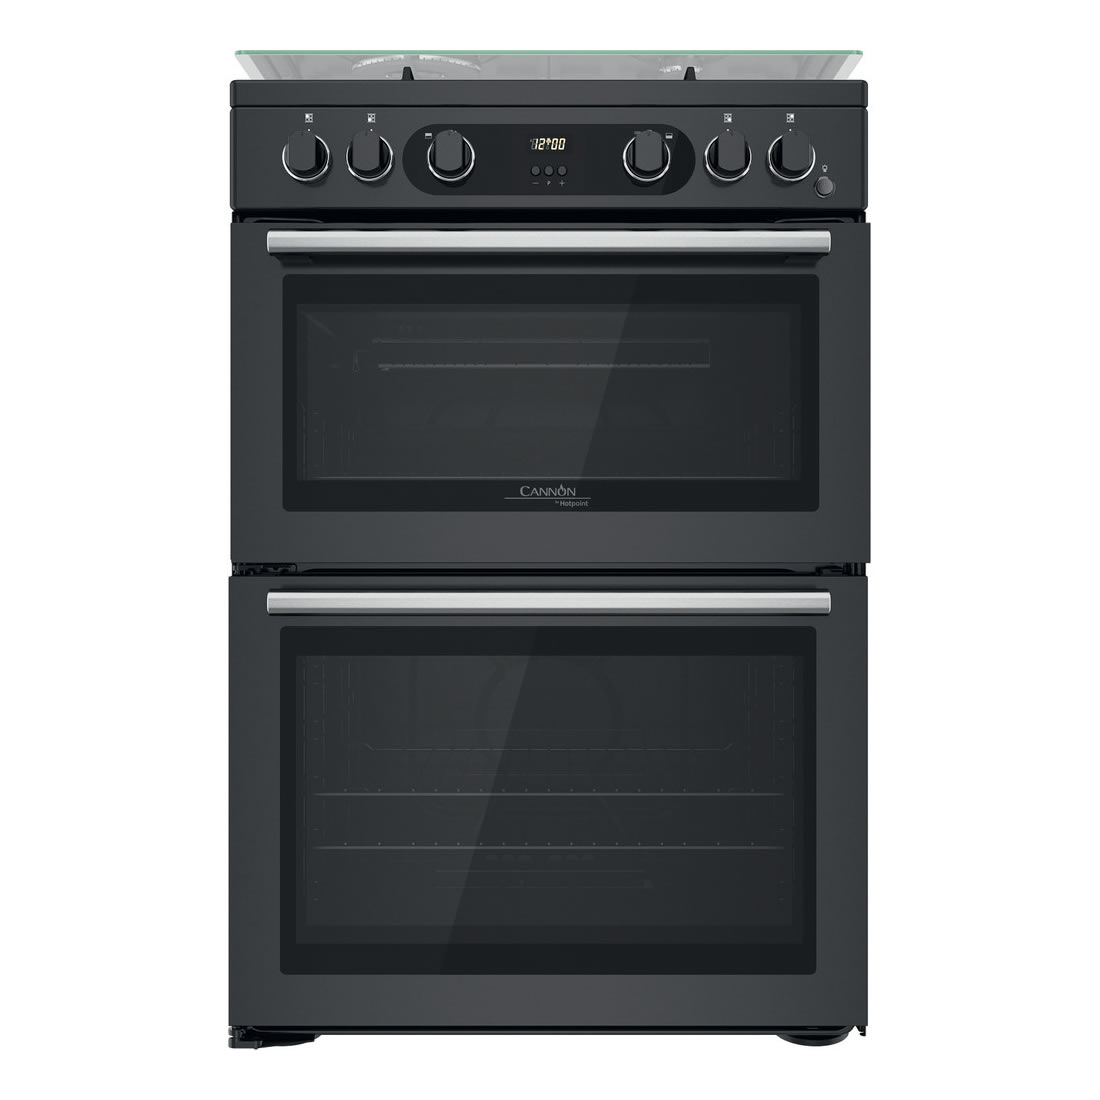 Hotpoint 600mm Double Gas Oven 4 Burner Hob Anthracite